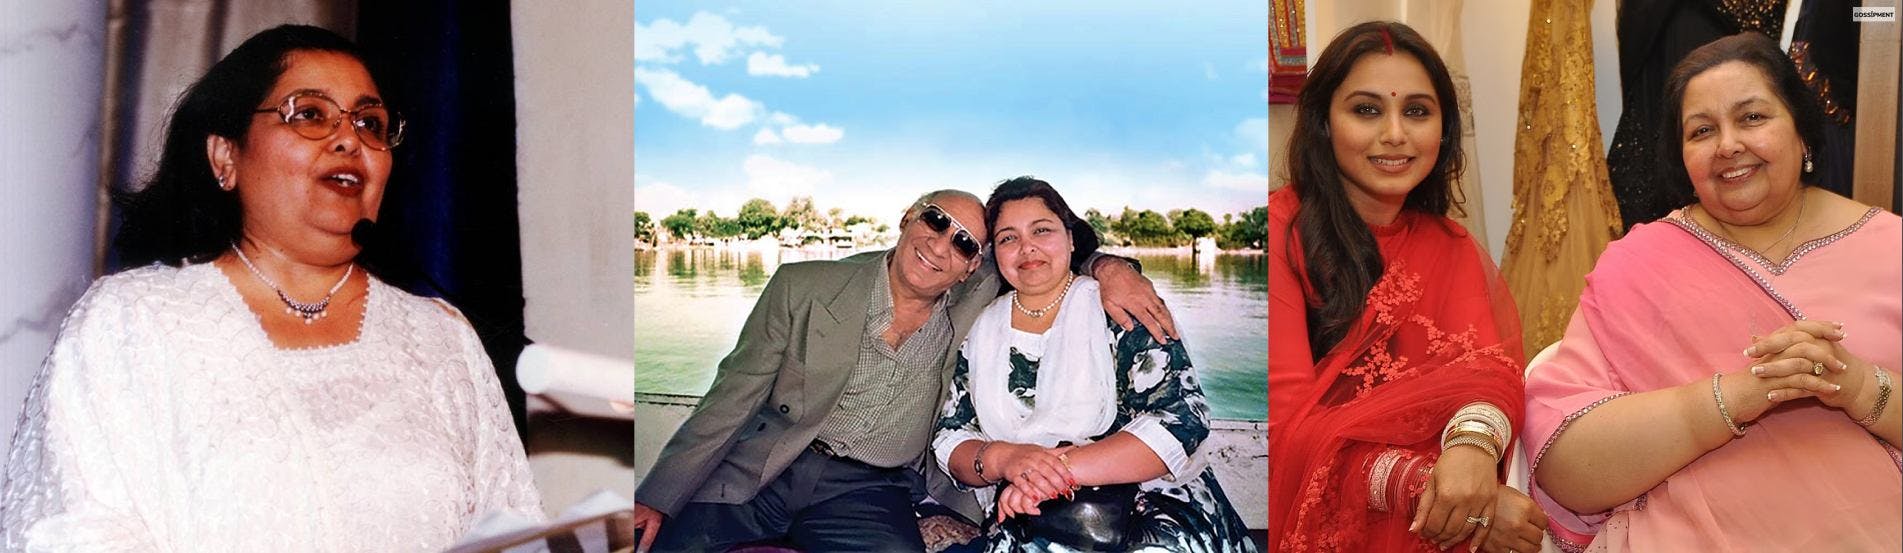 Cover Image for Director Yash Chopra’s Wife, Pamela Chopra, Passes Away At The Age Of 74